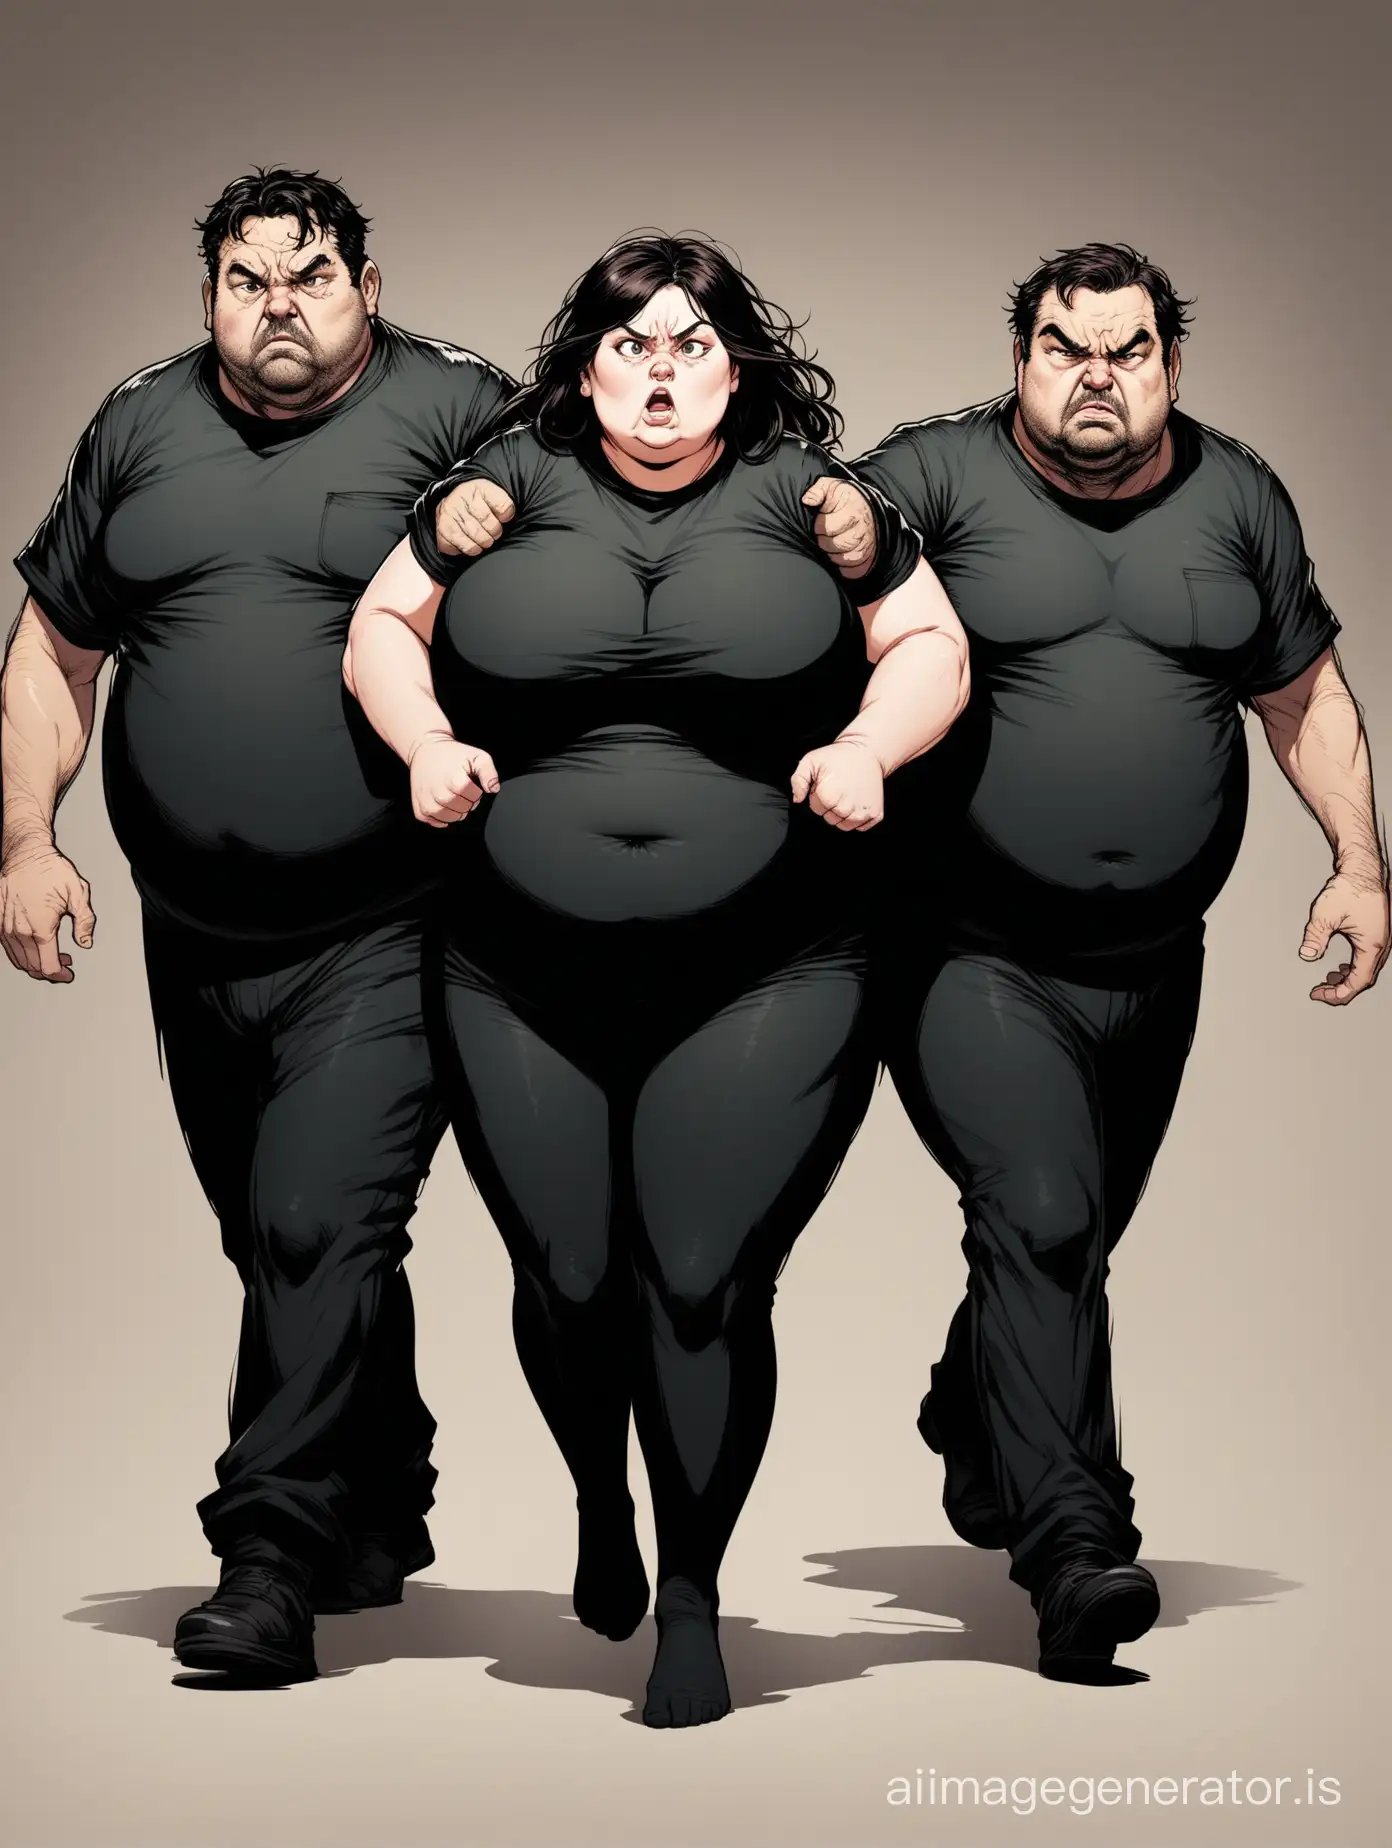 An unkempt middle aged fat woman with disheveled dark hair in tights with pulled knees and an alcoholic T-shirt is being led by the arms of two men with serious, indifferent faces, dressed in black jumpsuits.